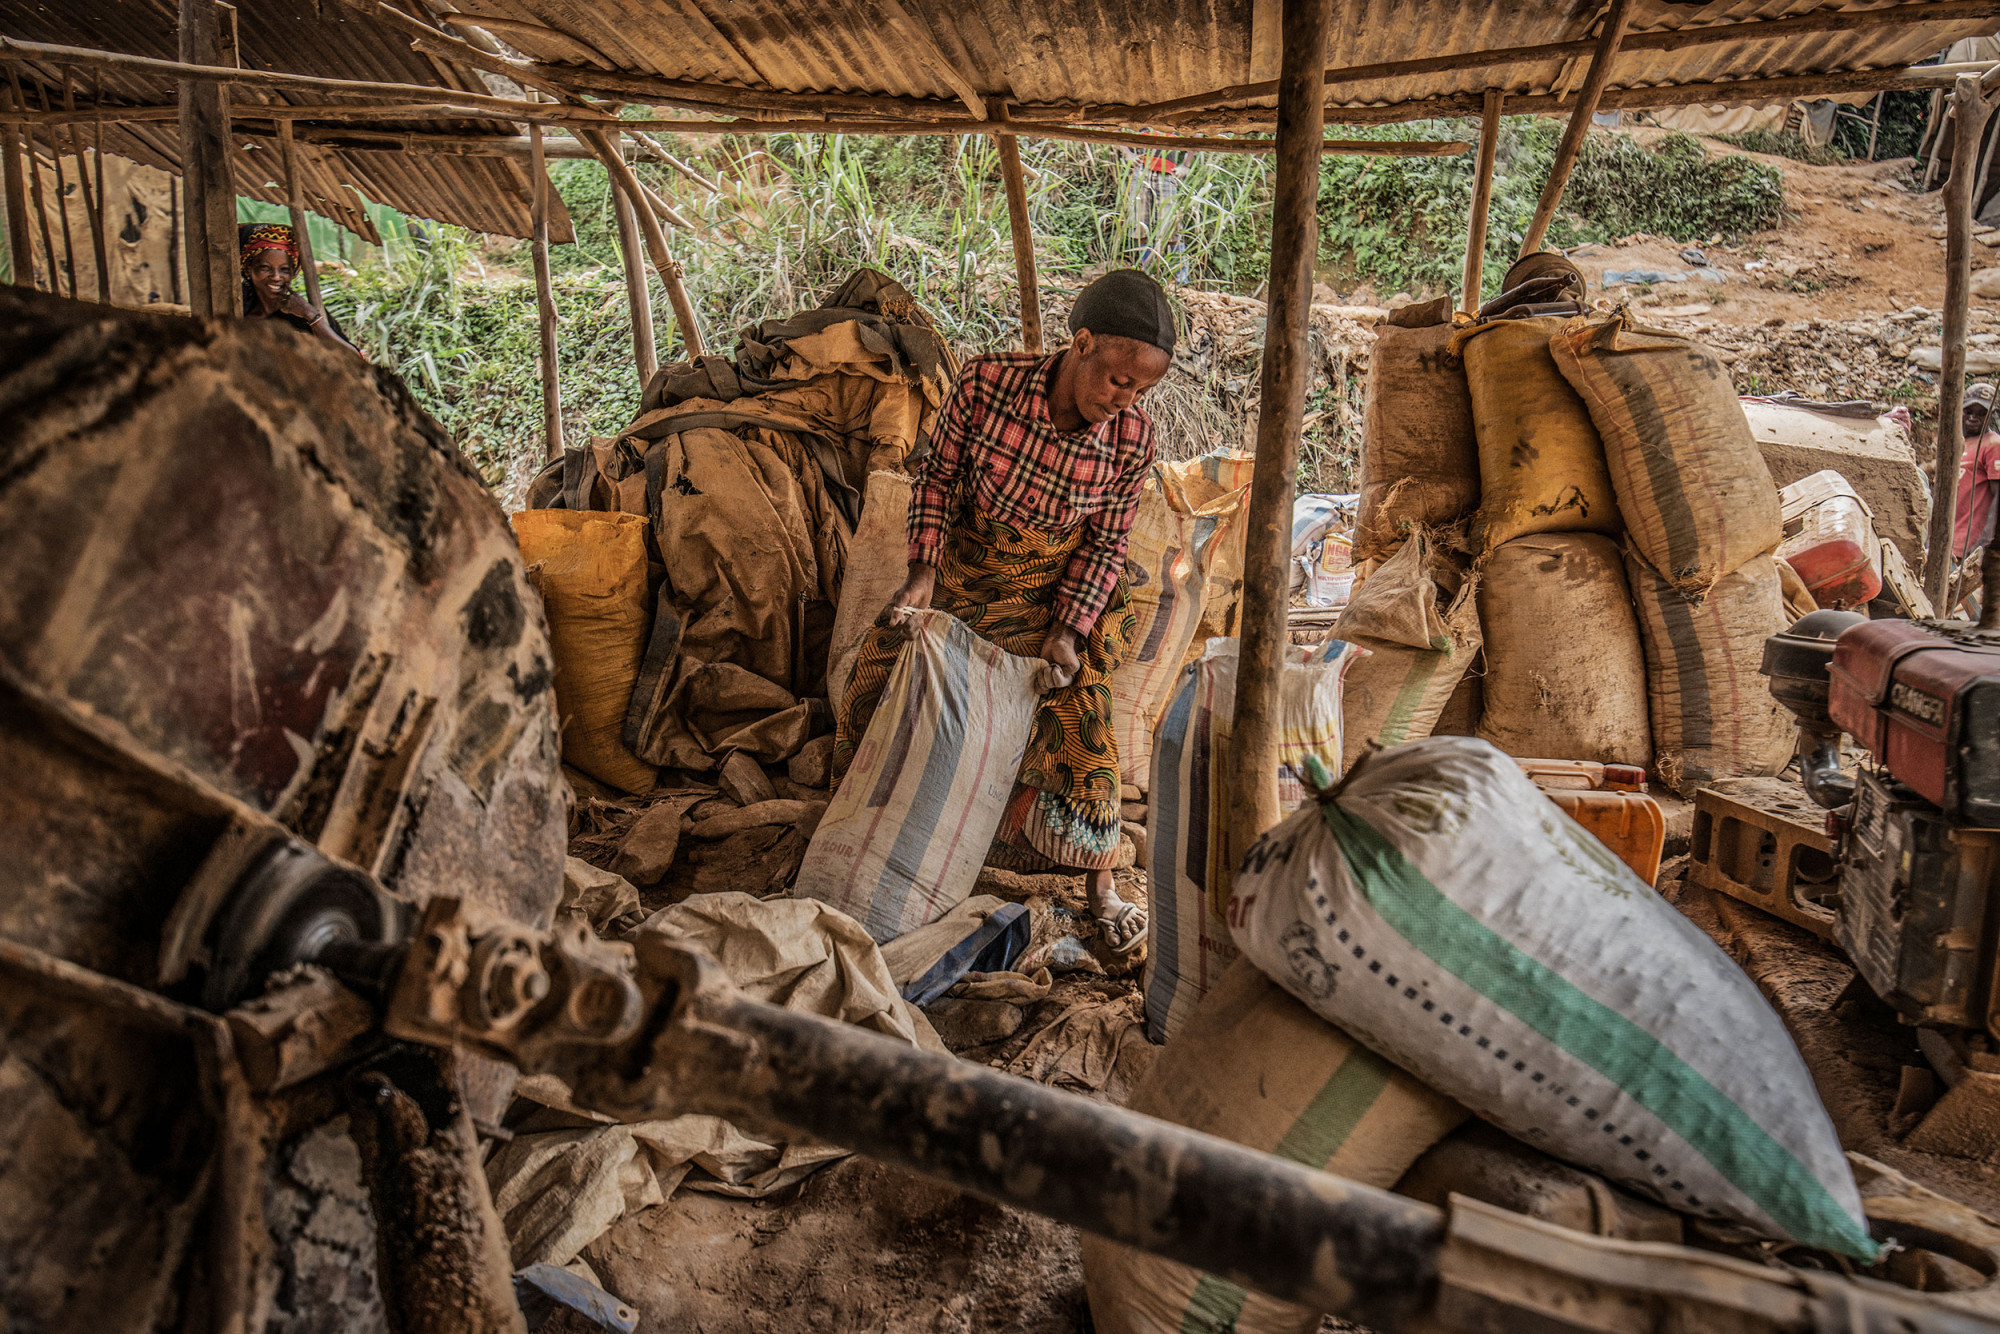 South Kivu Province, March 2021. A woman loads sacks of sand to be filtered for gold particles at a mine called D3 in Kamituga. © Moses Sawasawa for Fondation Carmignac